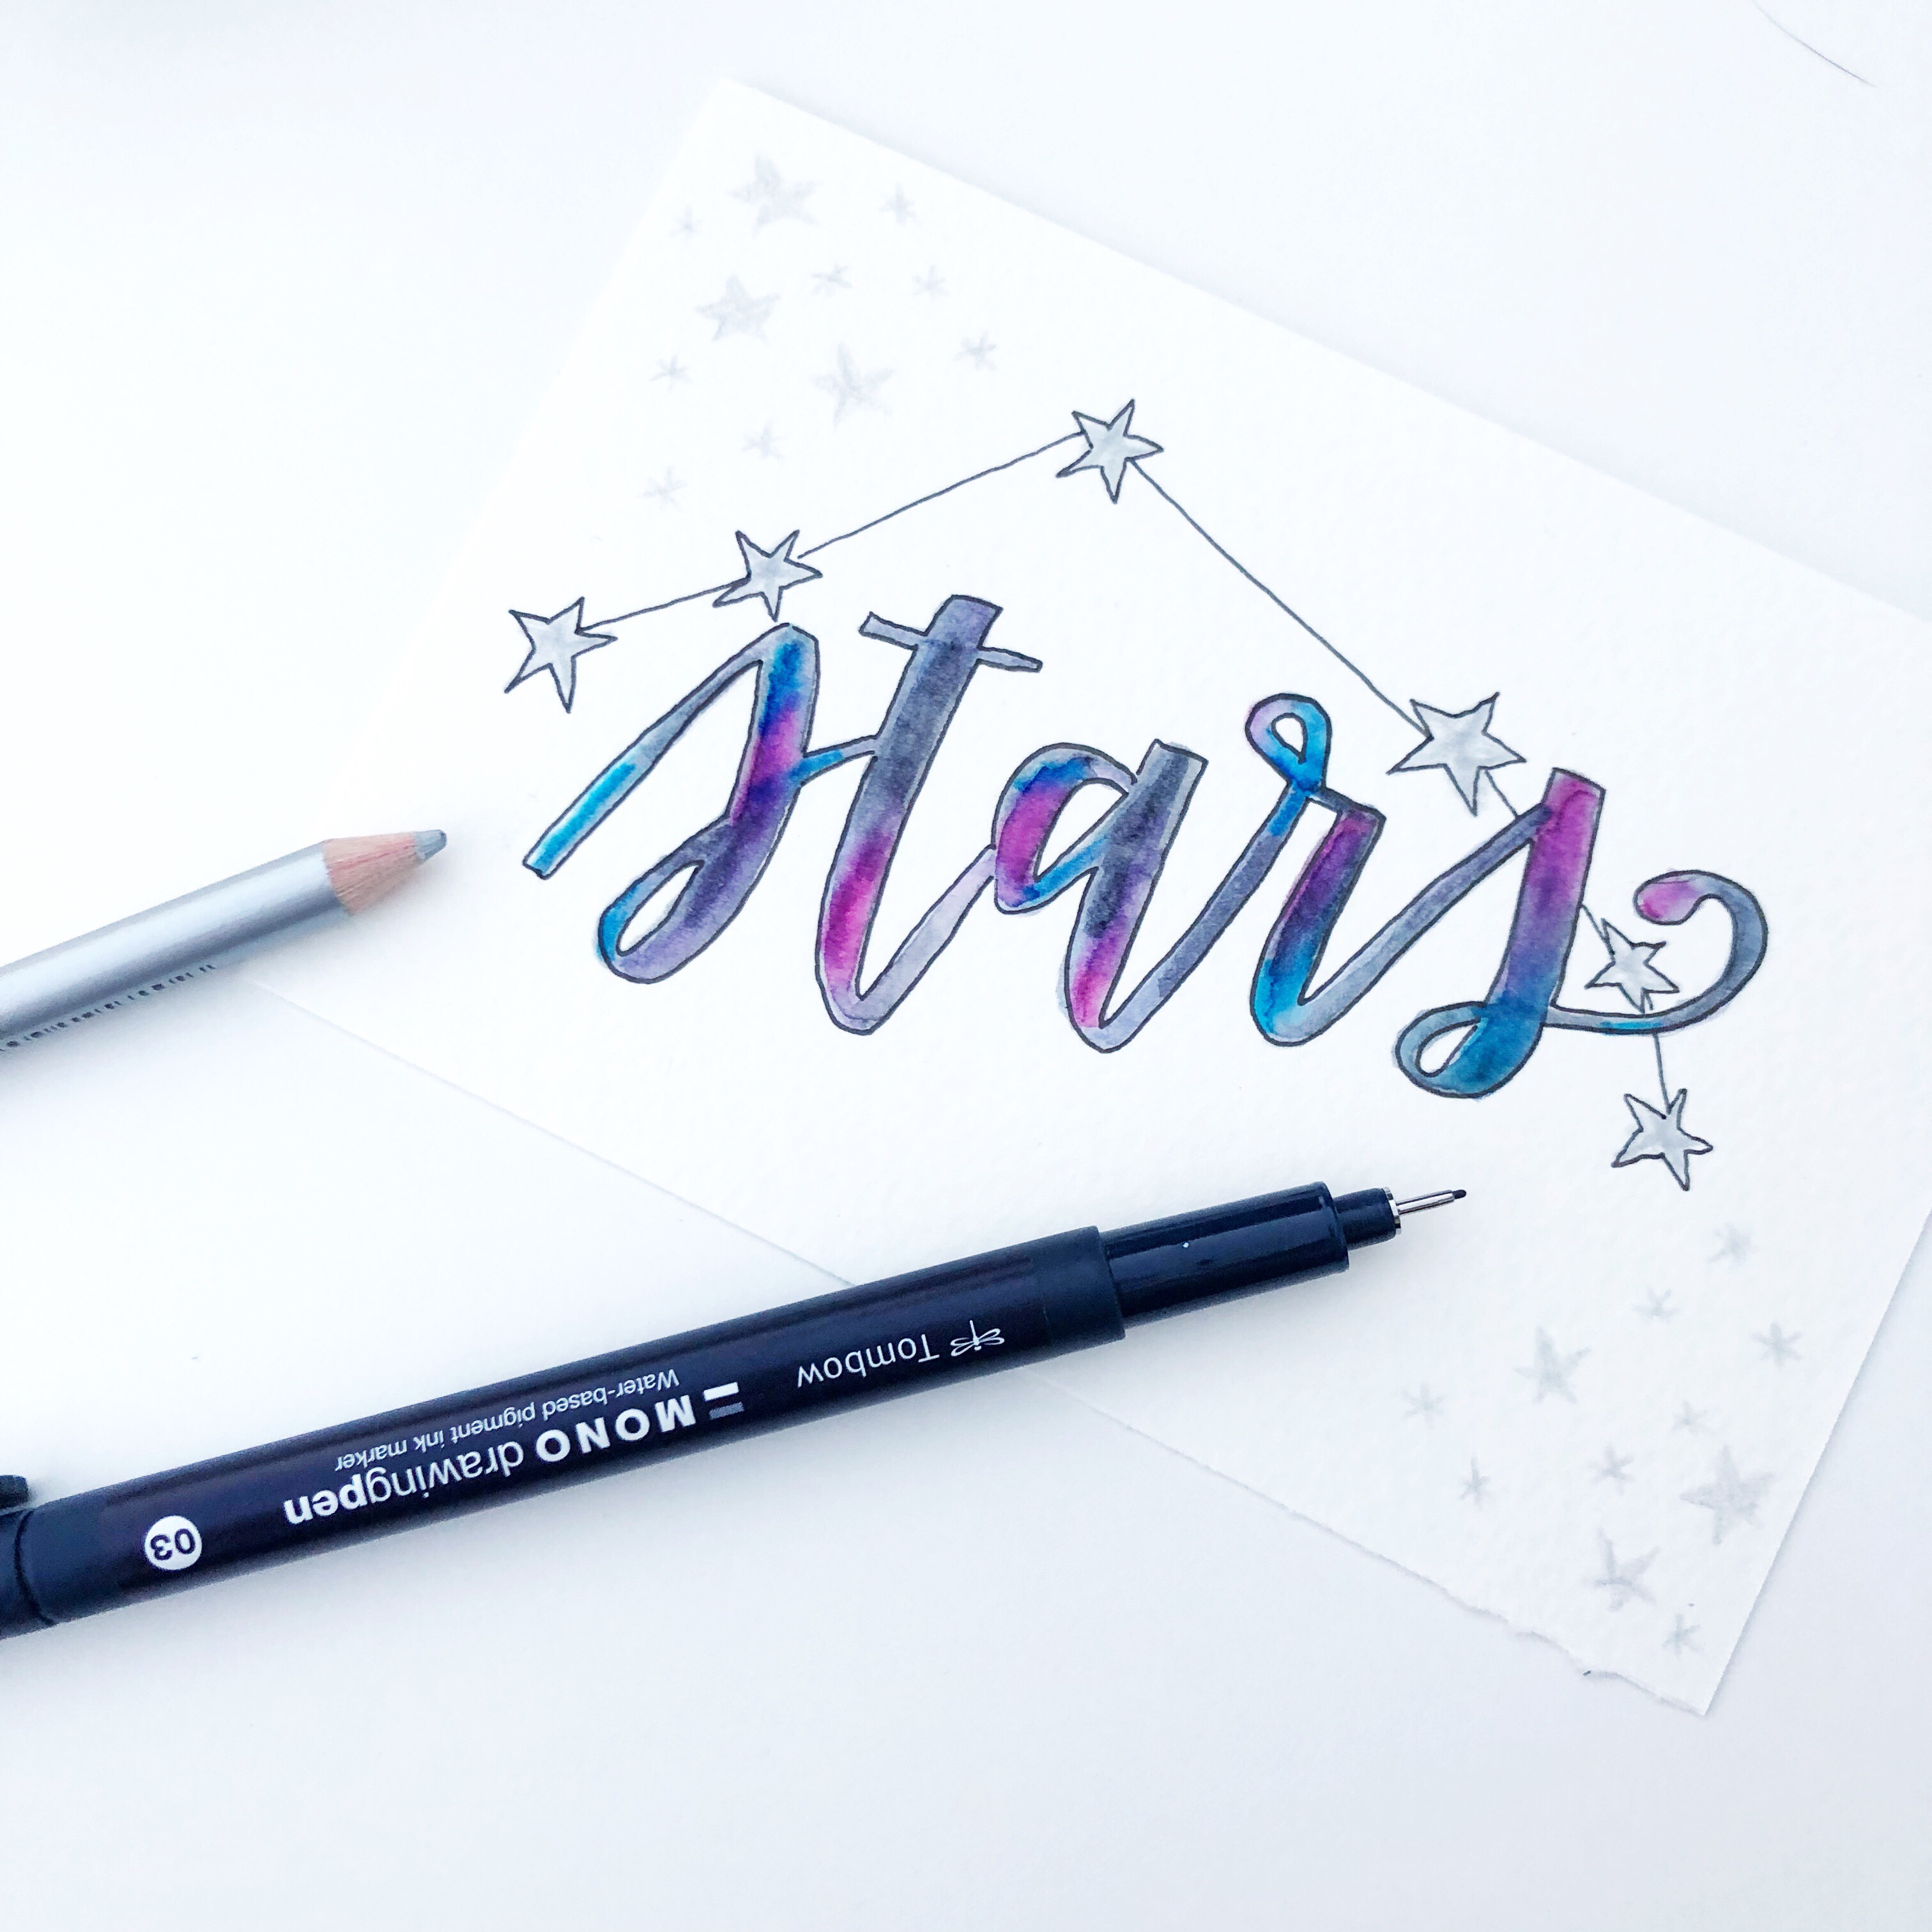 Lauren Fitzmaurice of Renmade Calligraphy shows you how to create a zodiac themed hand lettered quote in 5 easy steps.